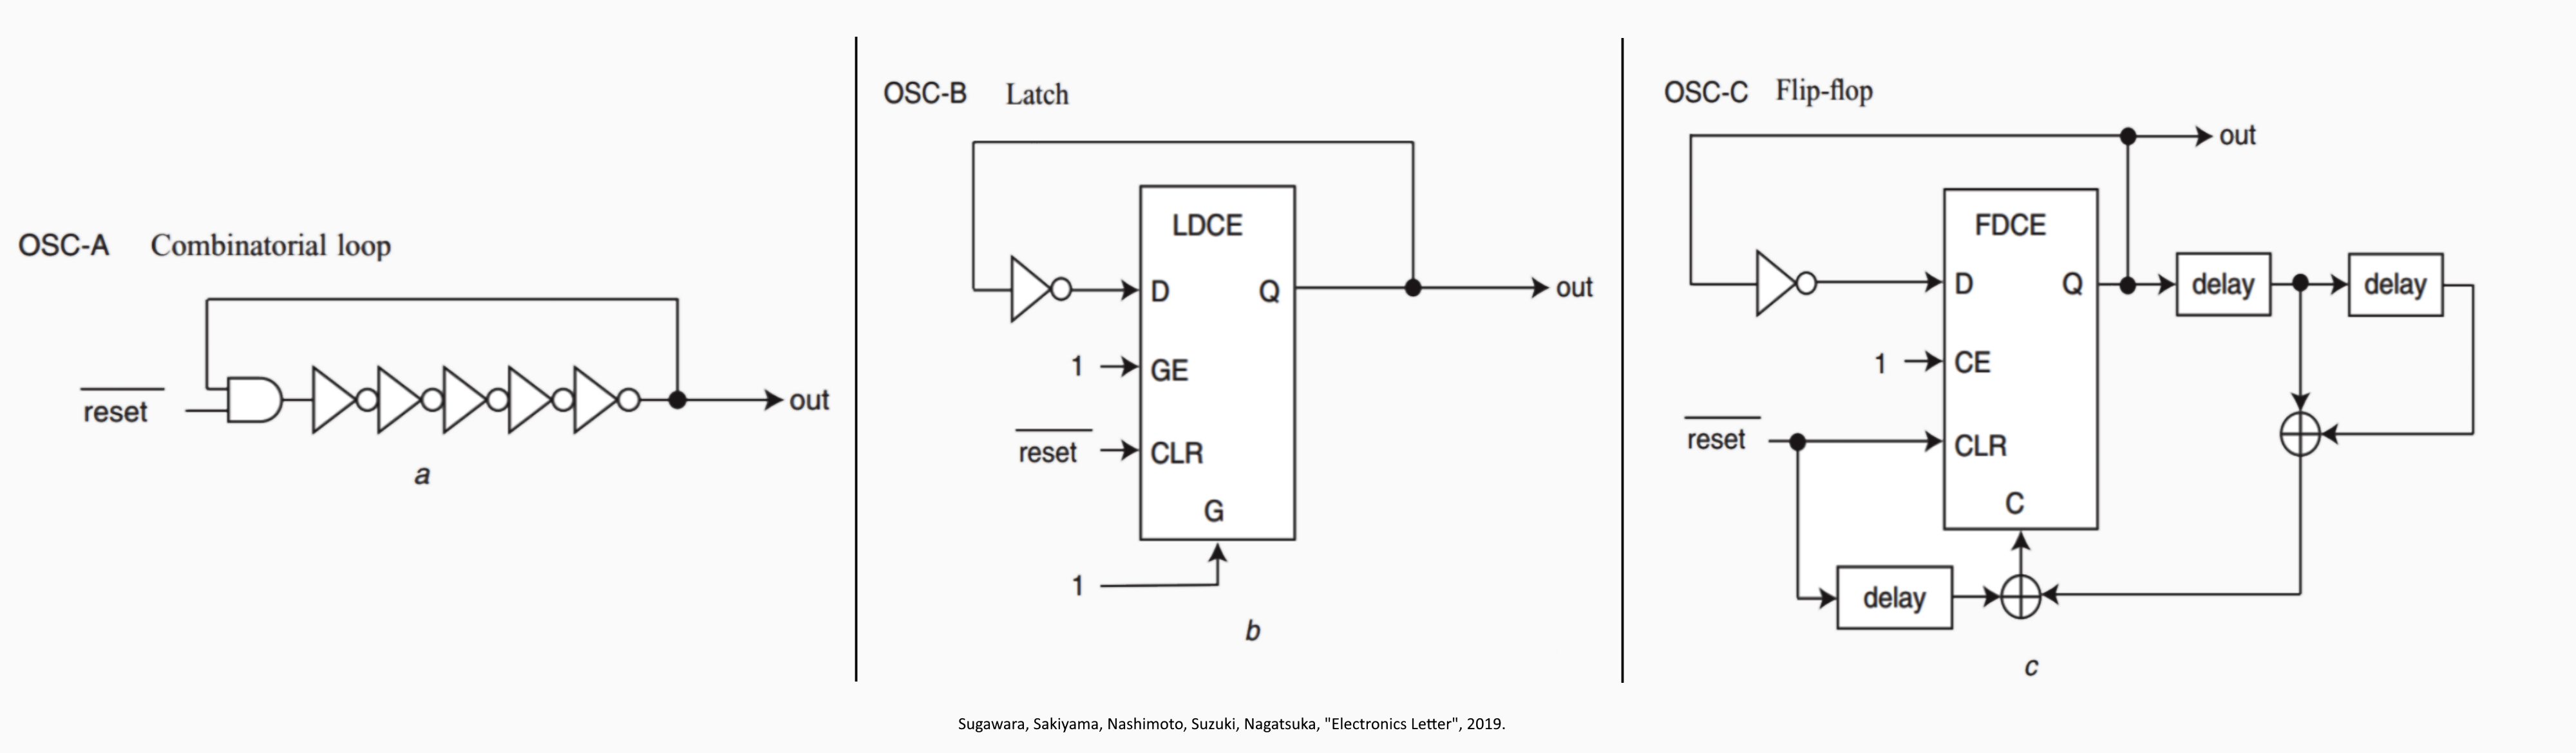 From "Oscillator without combinatorial logic", Figure 2